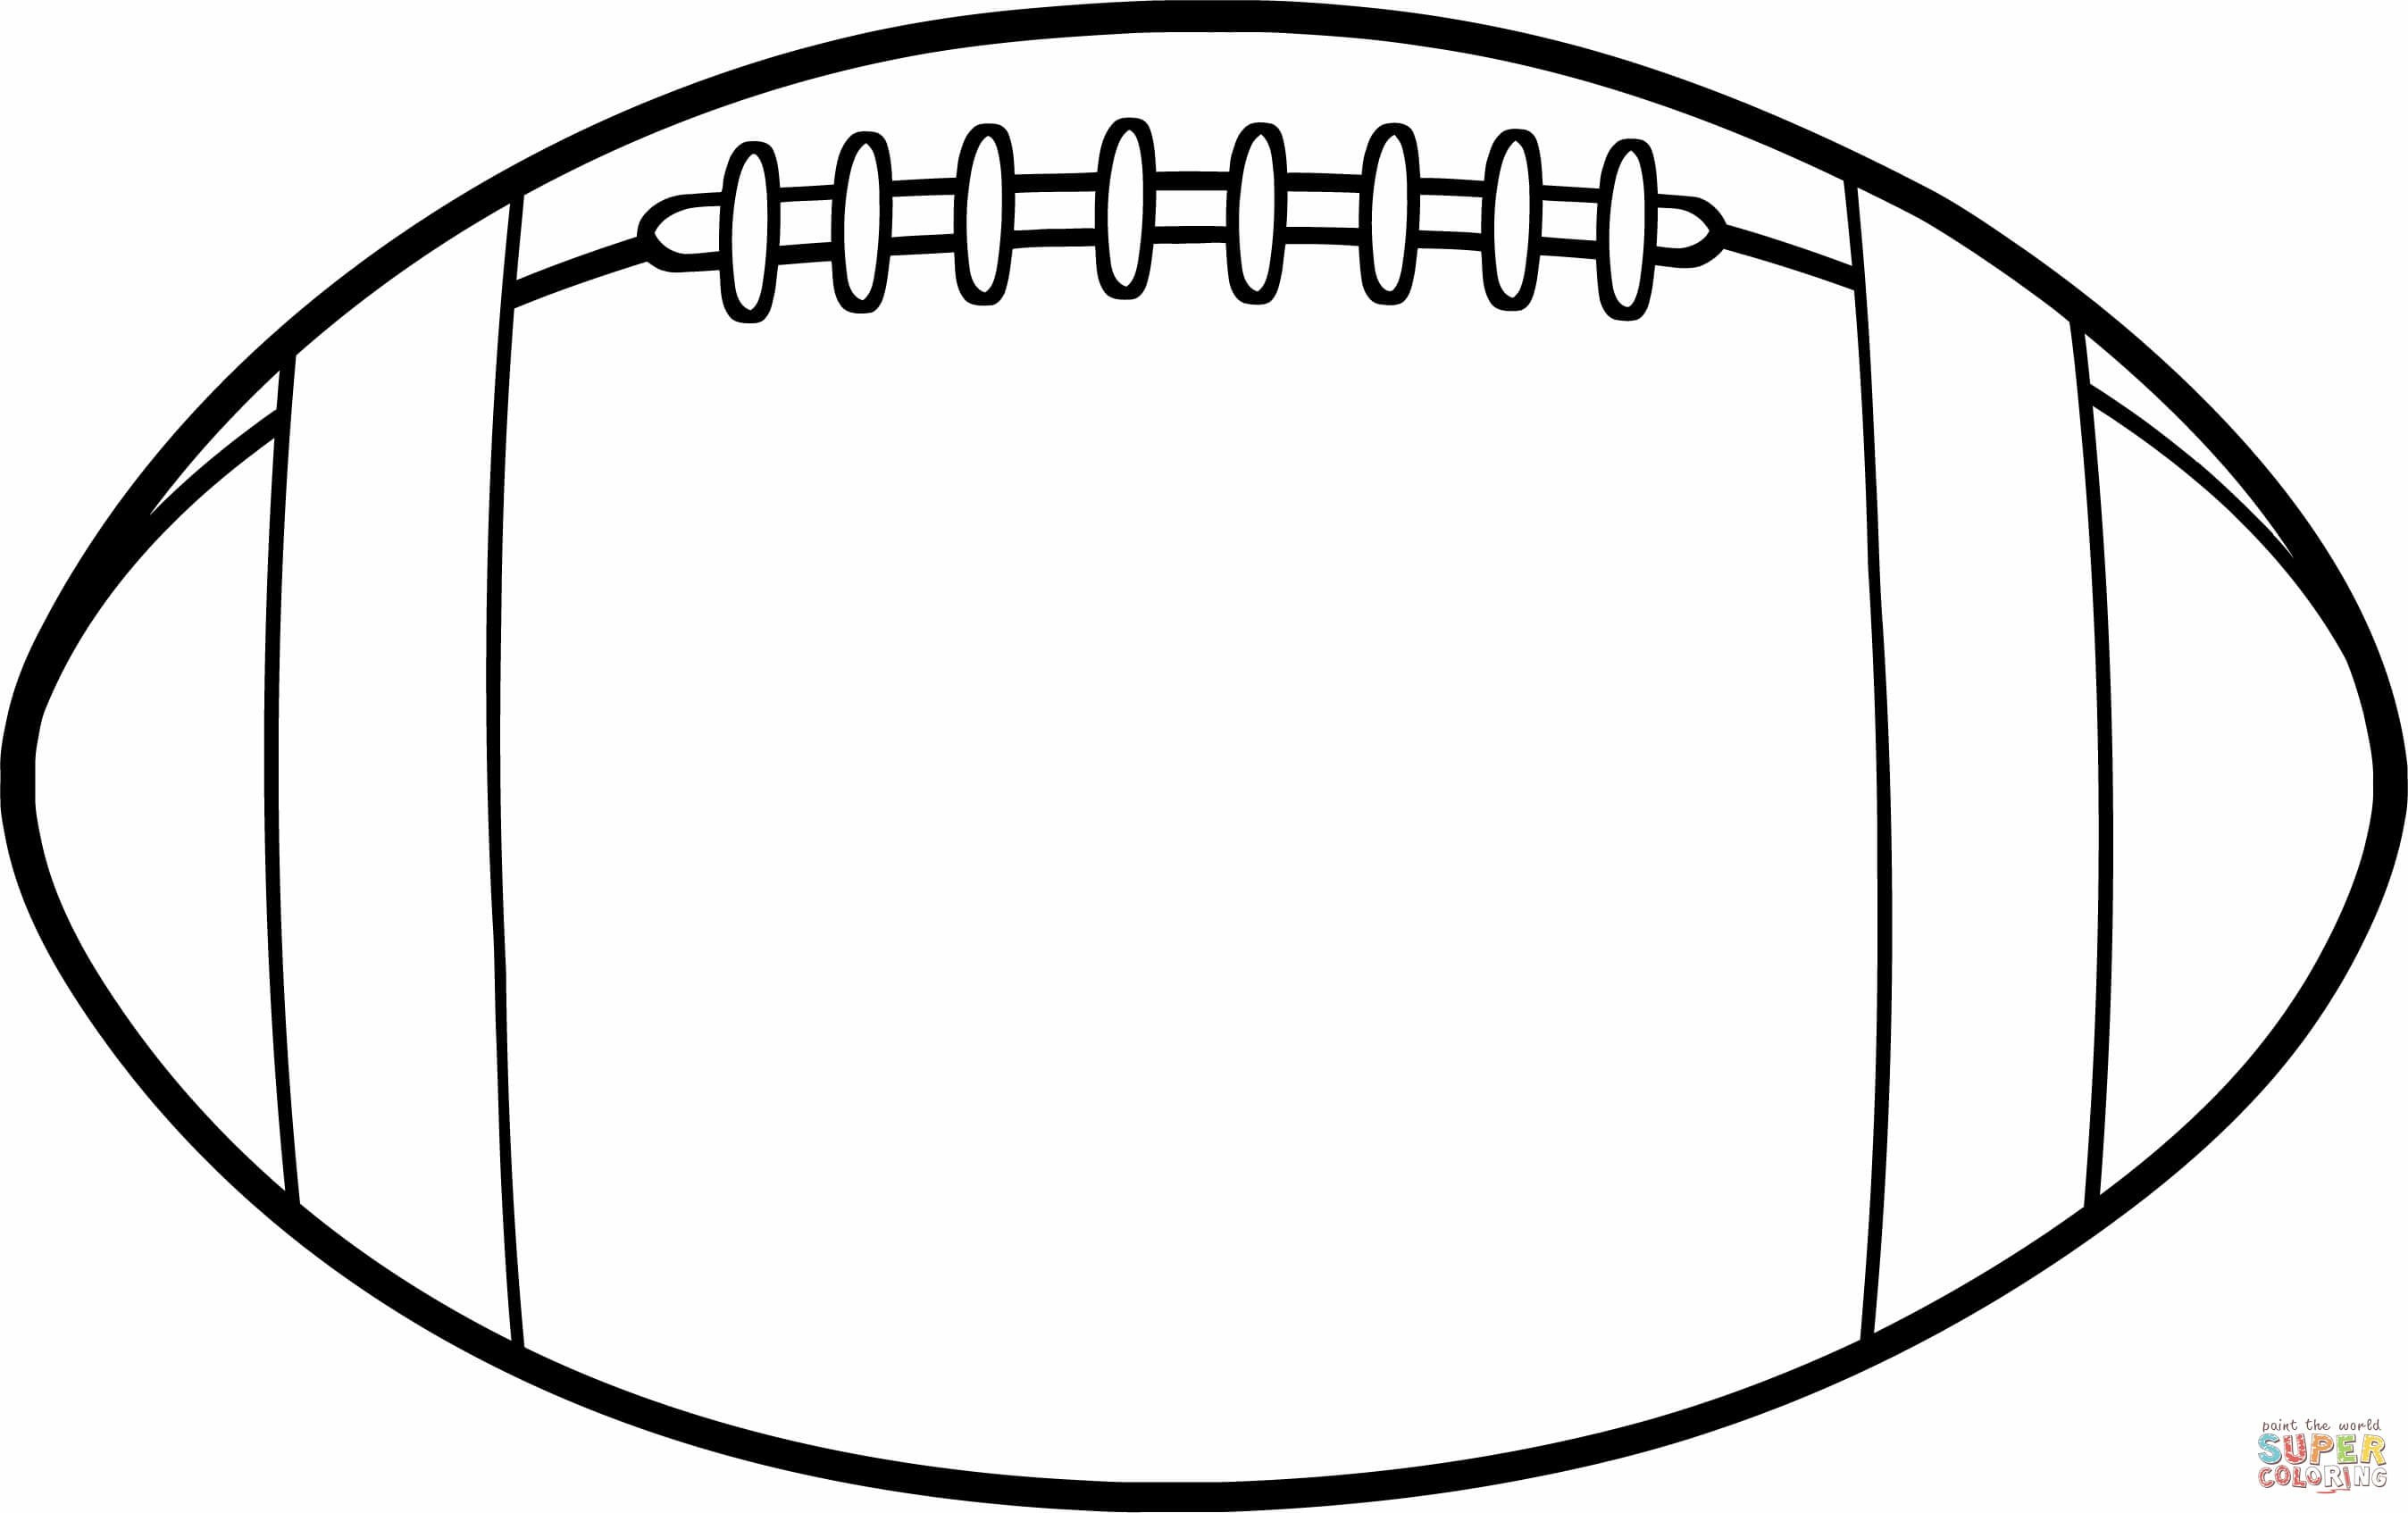 Coloring Pages : Coloring Pages Free Online Football Printable - Free Printable Football Templates